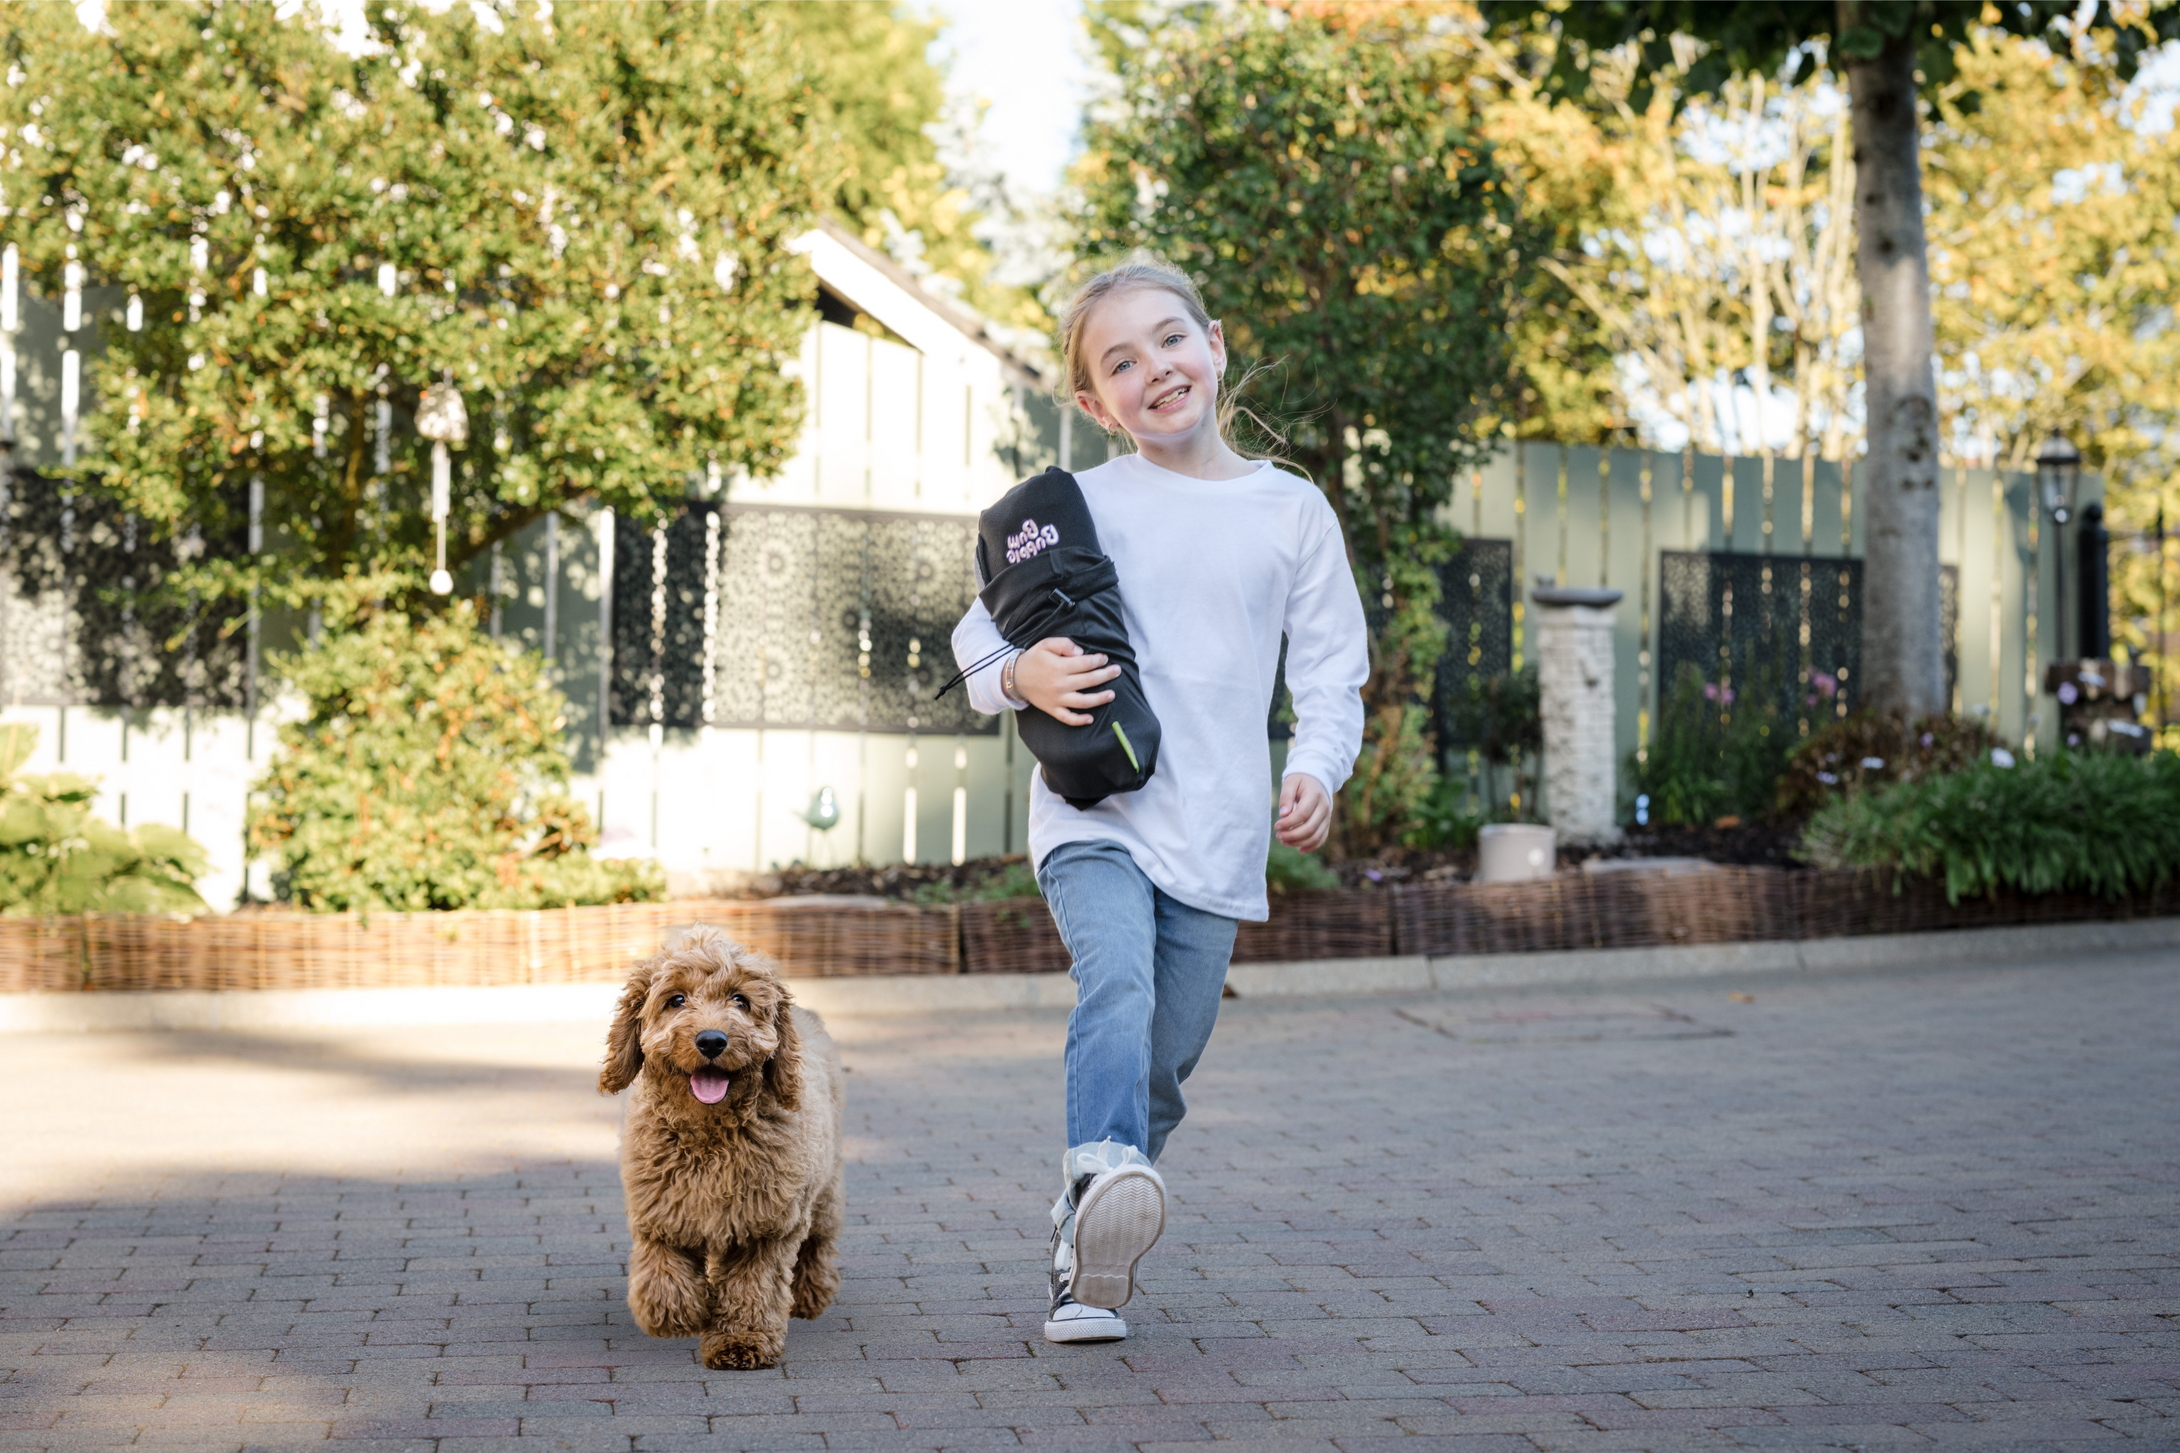 Baby girl walking with a dog